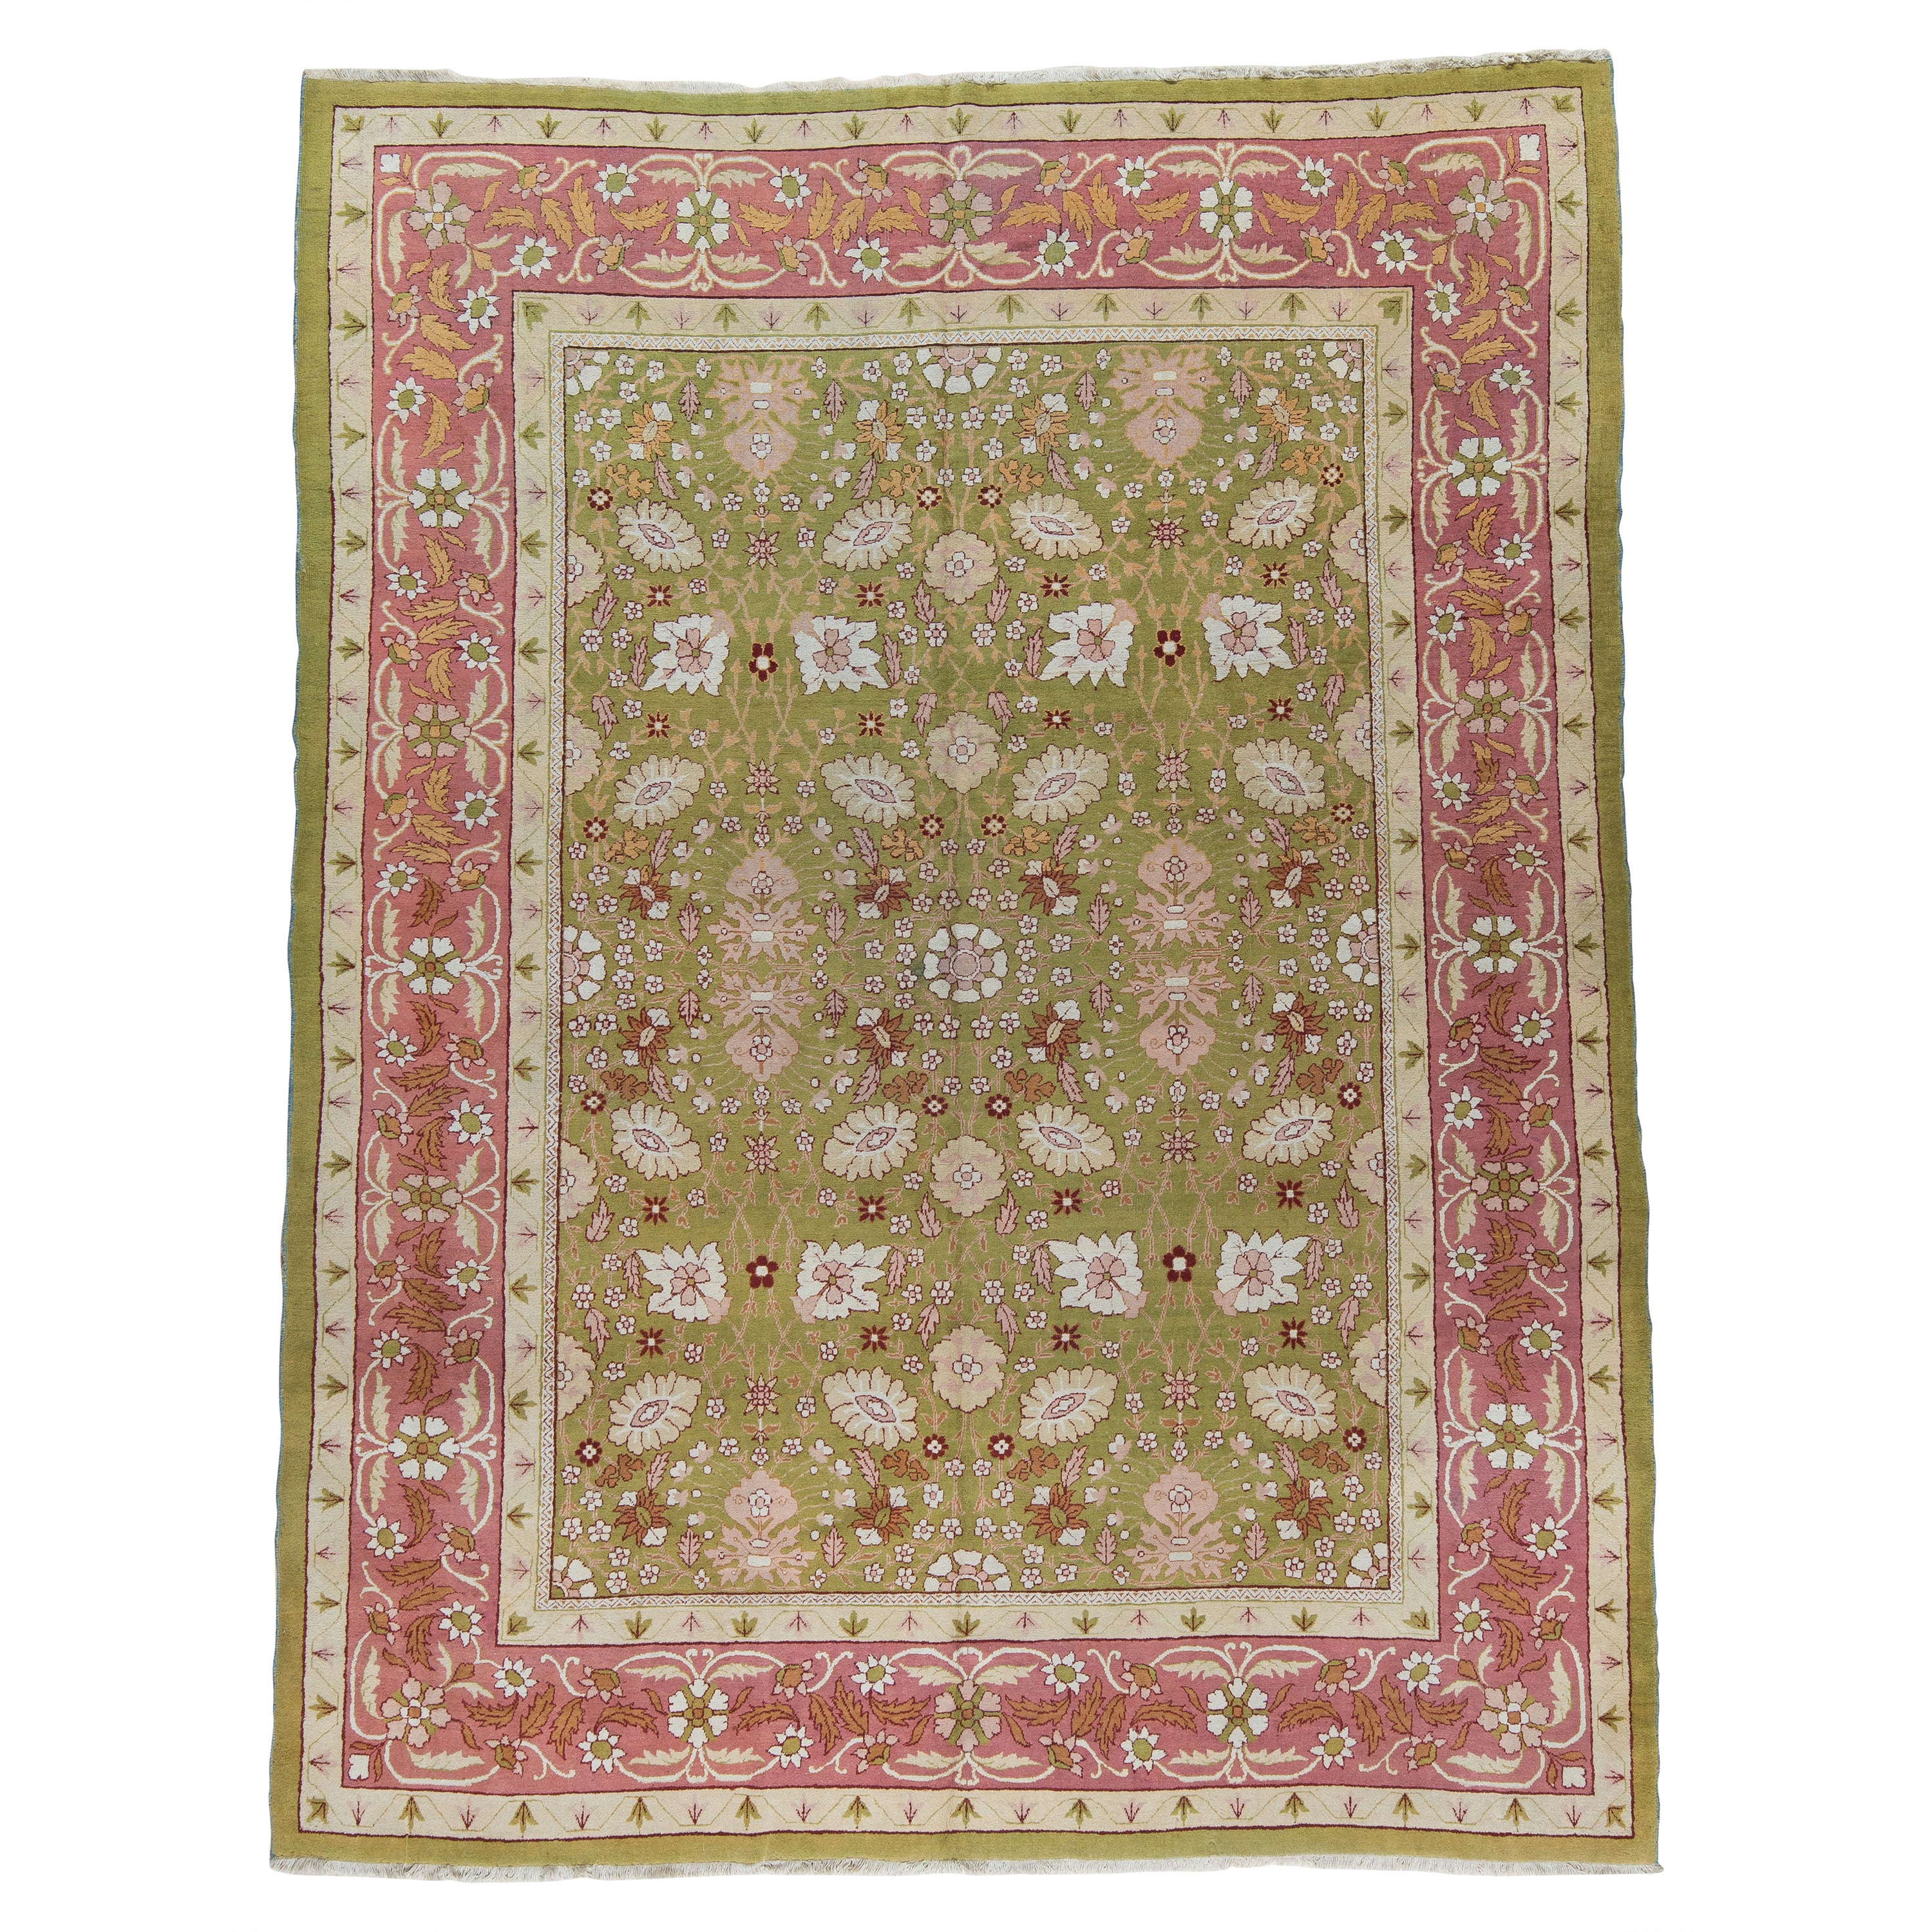 Antique Amritsar Rare Green and Pink Floral Room Size Rug